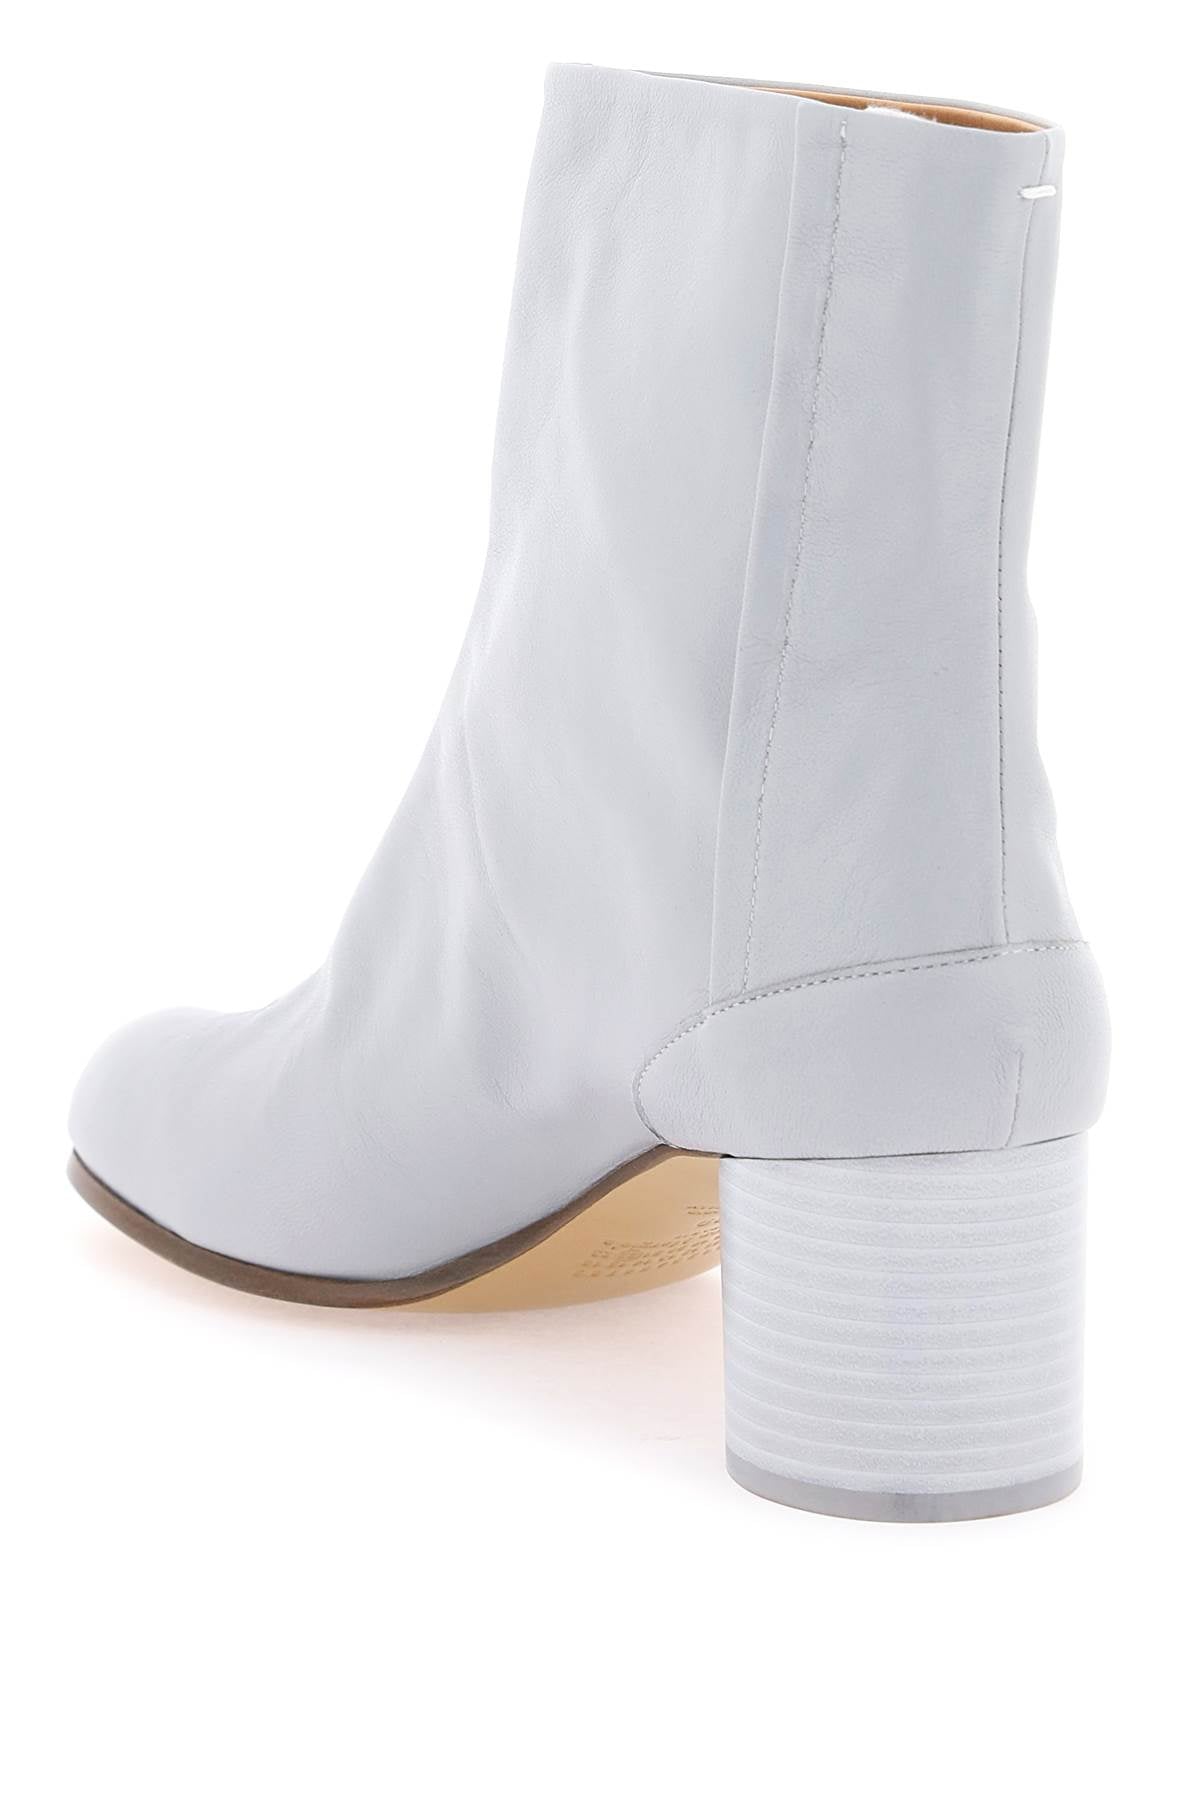 Shop Maison Margiela Multicolor Leather Ankle Boots With Iconic Cut And Distinctive White Stitch